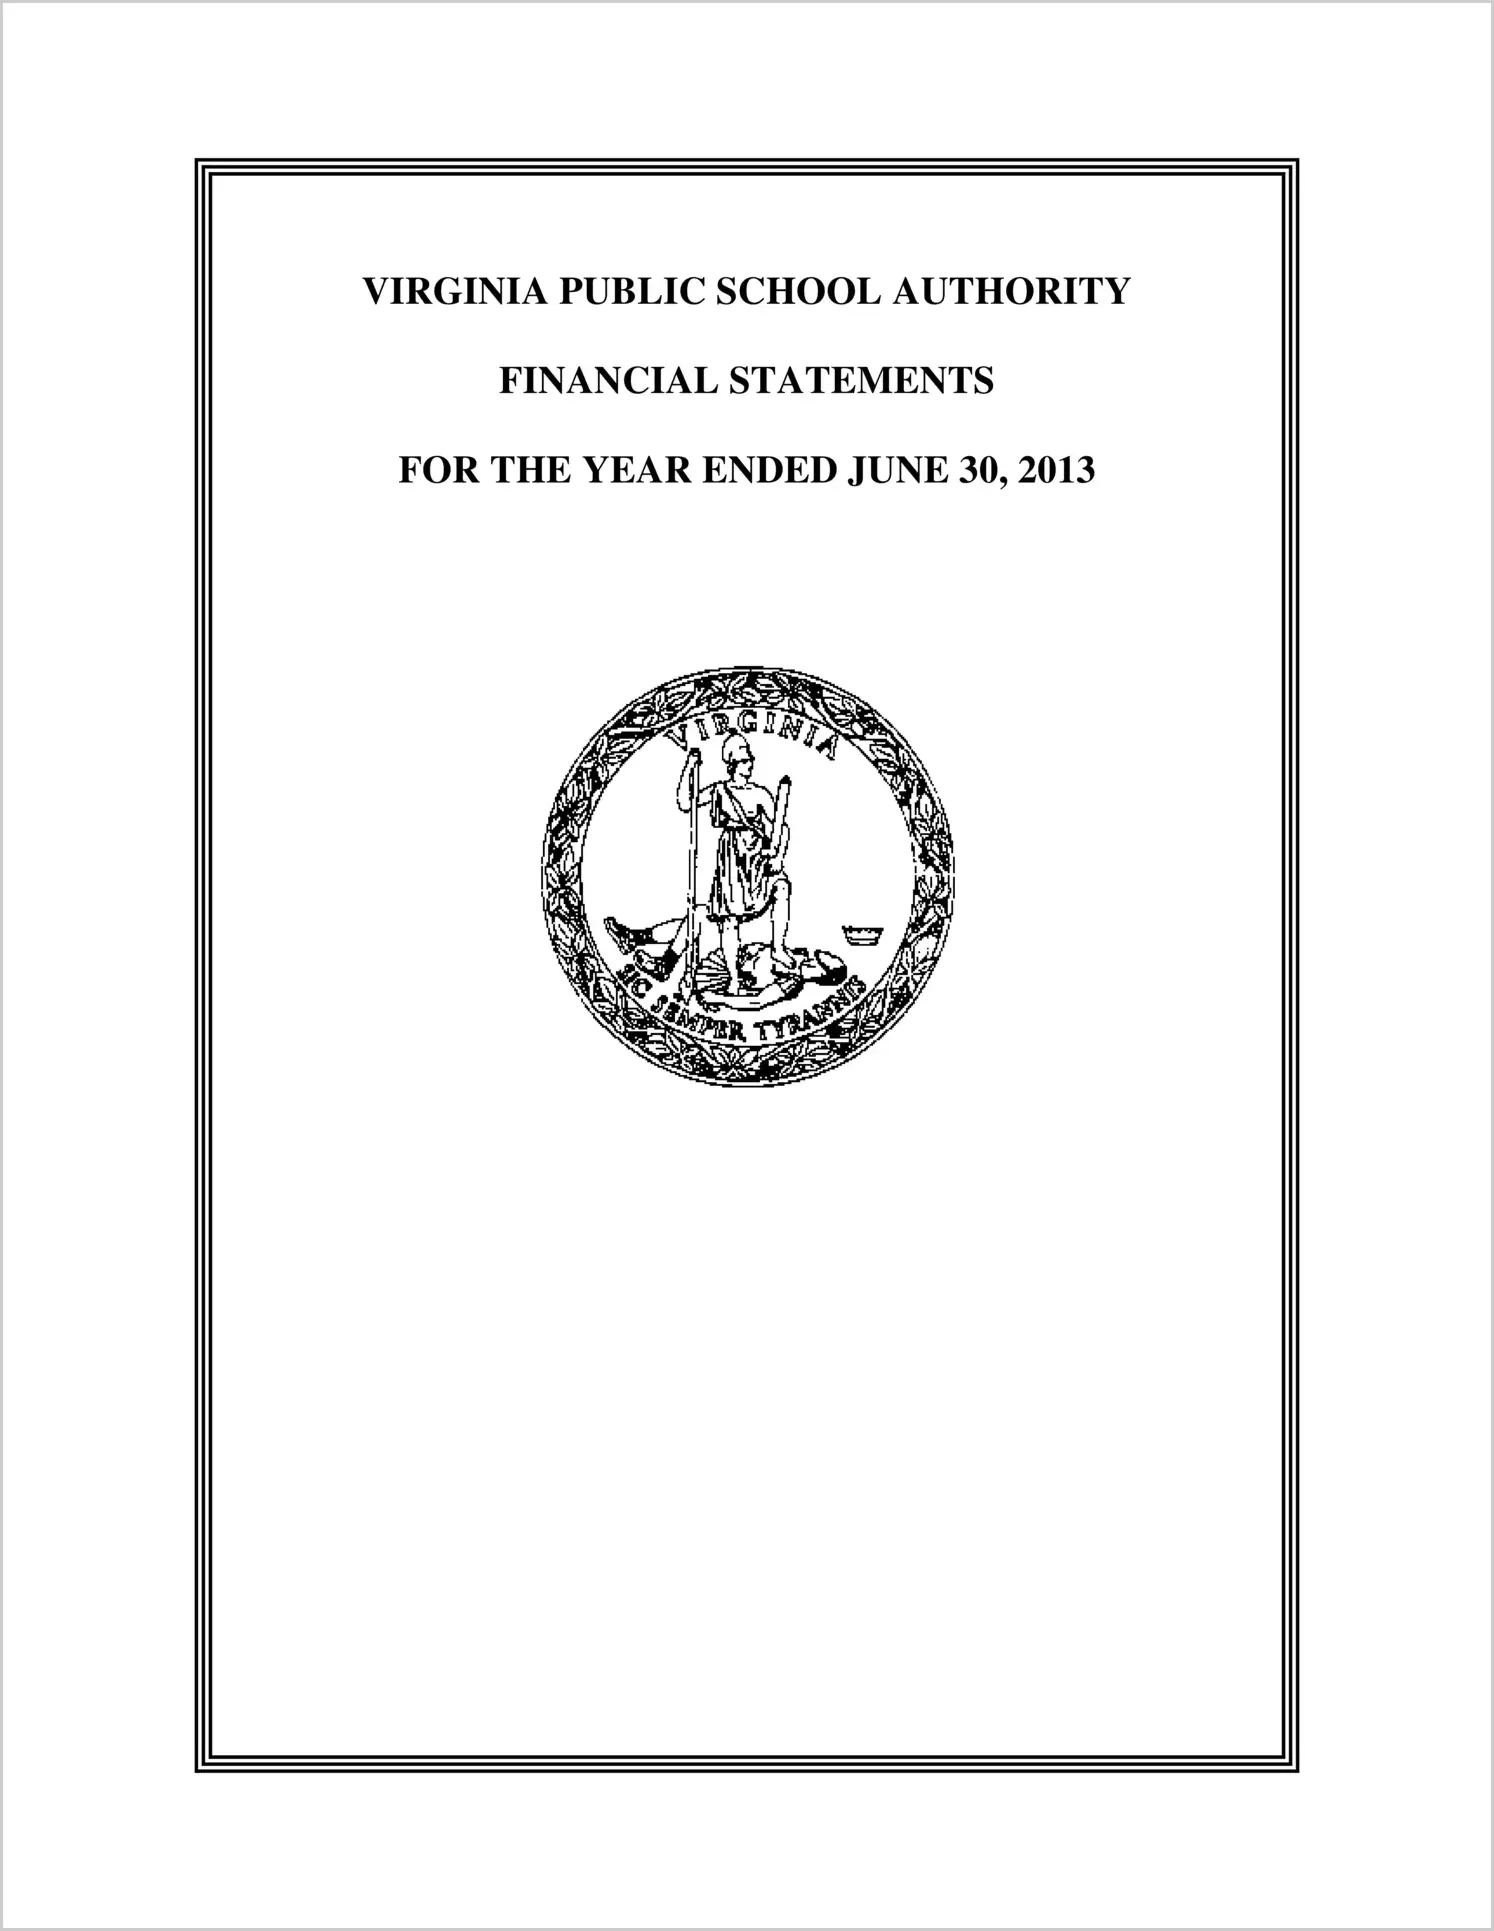 Virginia Public School Authority Financial Statements for the year ended June 30, 2013